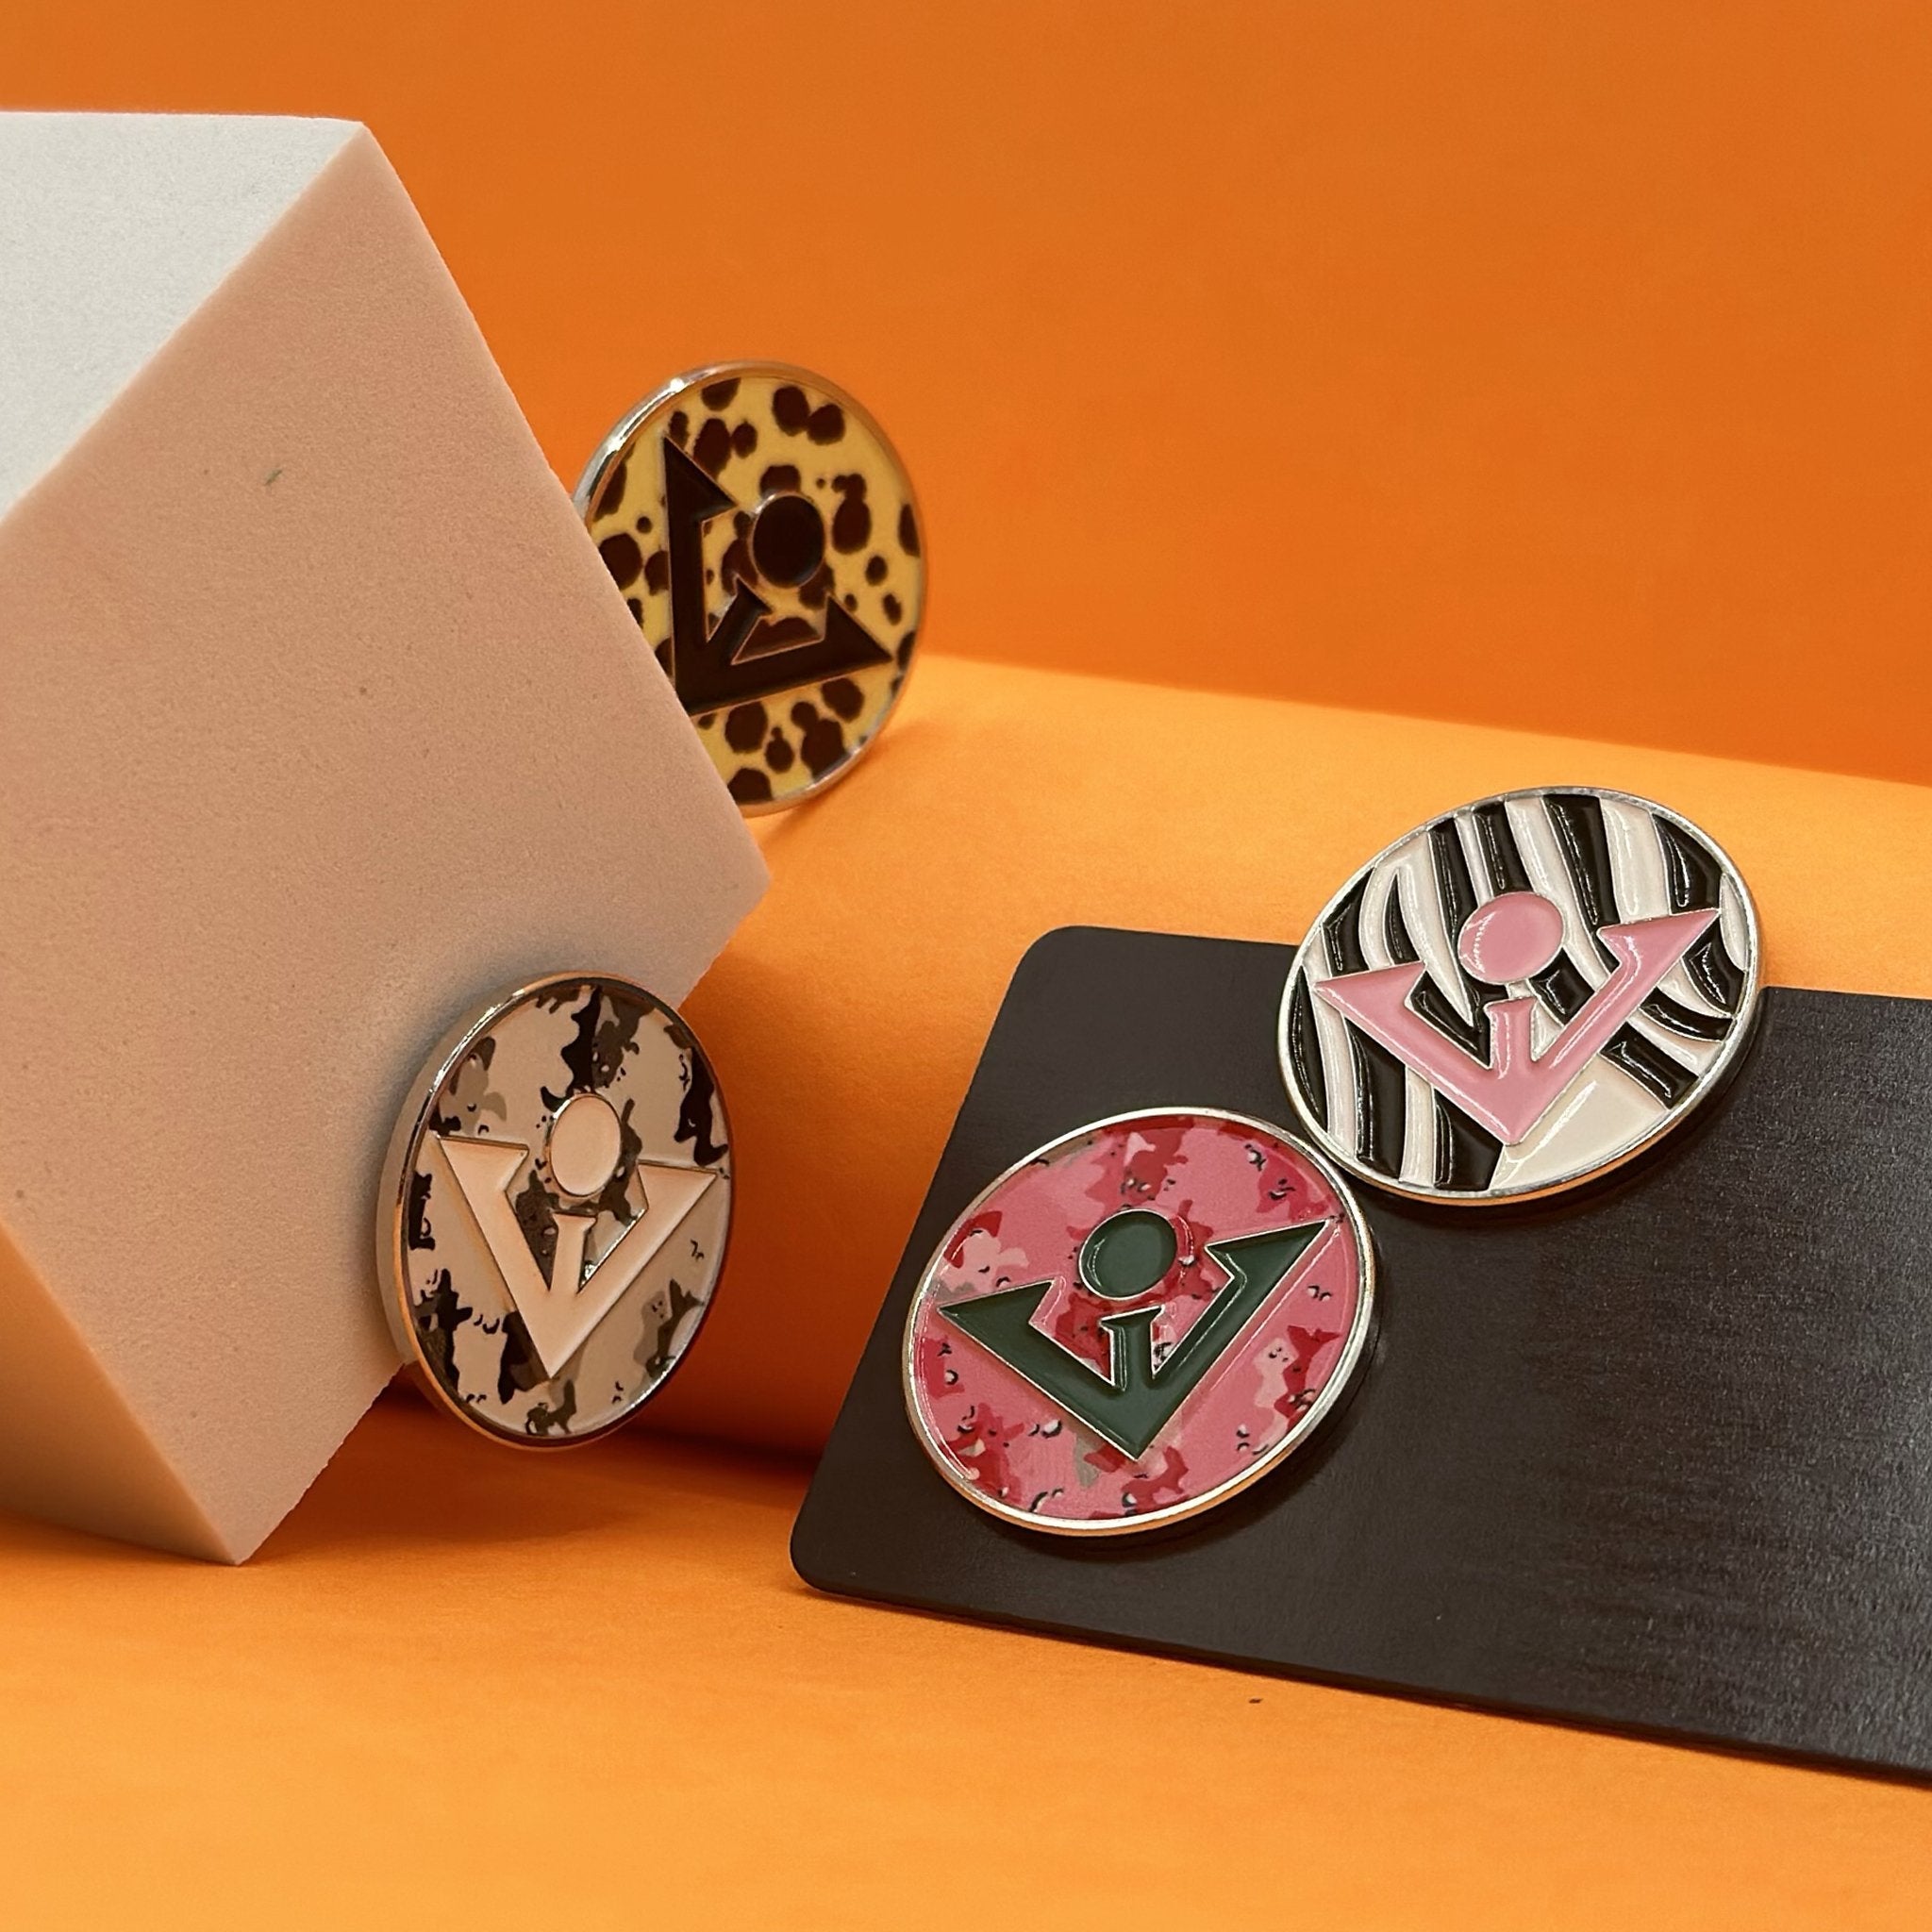 Printed designs magnetic golf ball markers, bundled product